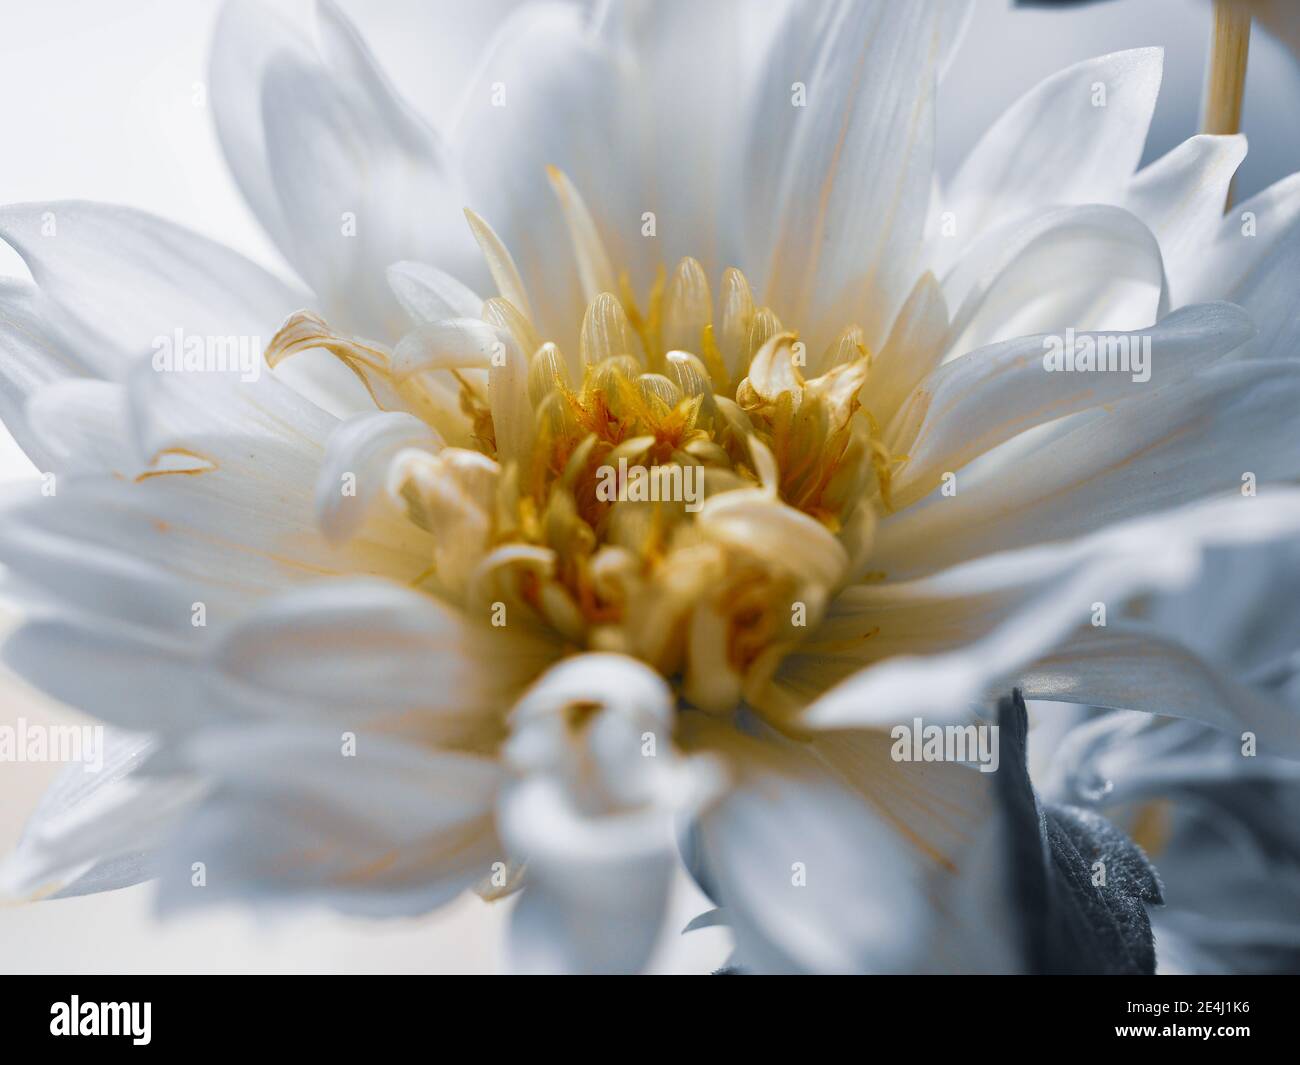 Artistic shots of creamy white Dahlia flower with a yellow centre Stock Photo